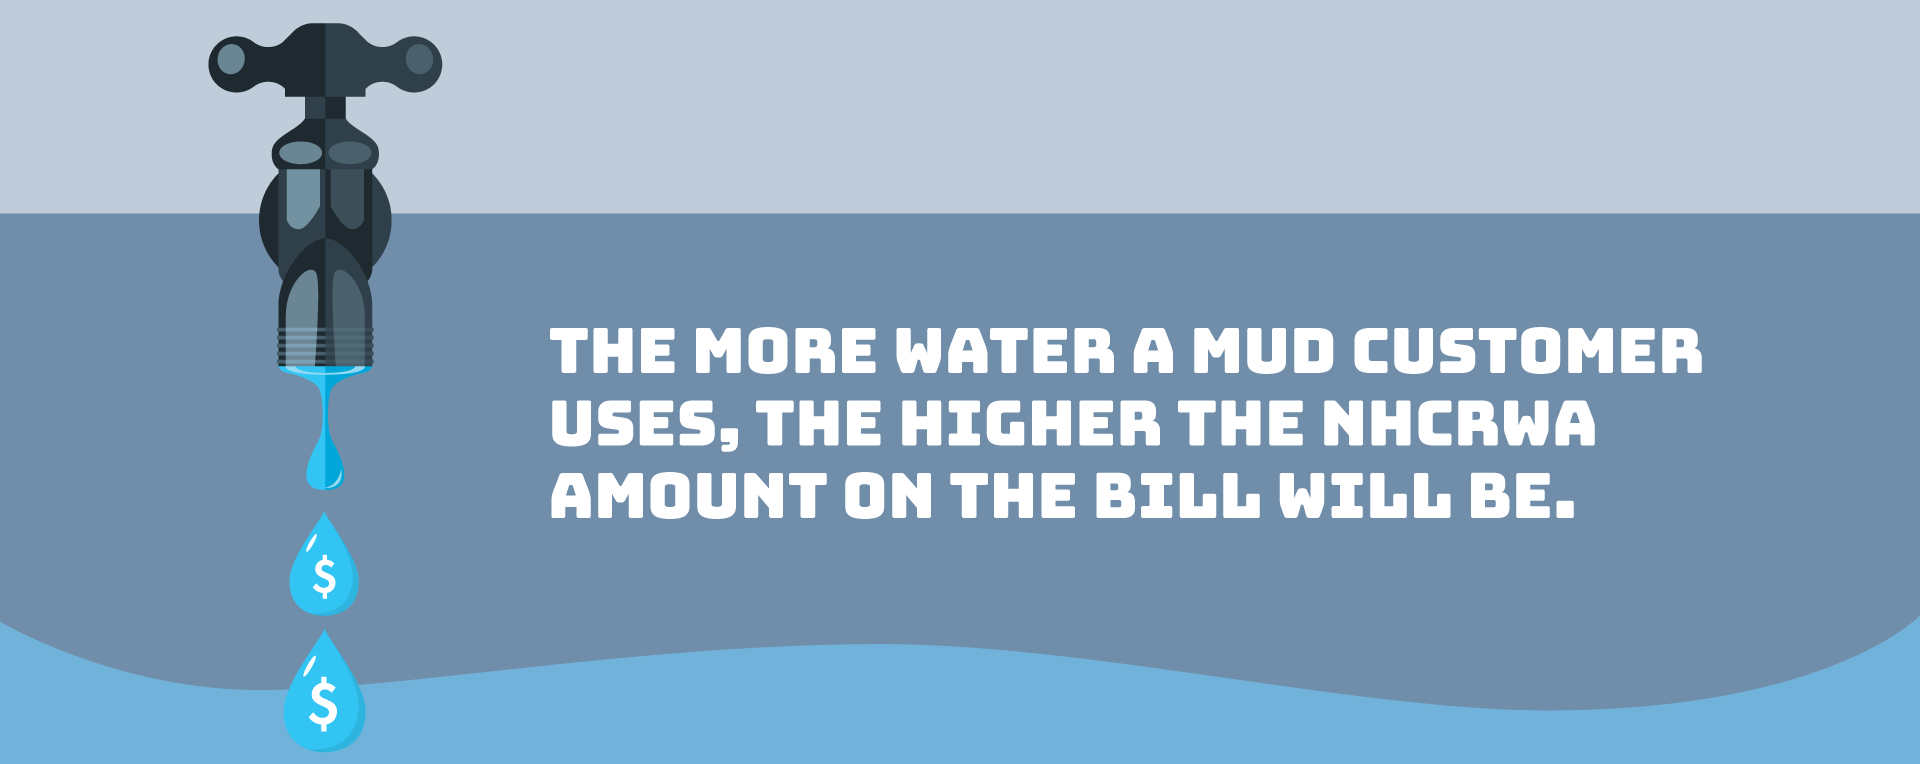 The more water you use, the higher your bill will be